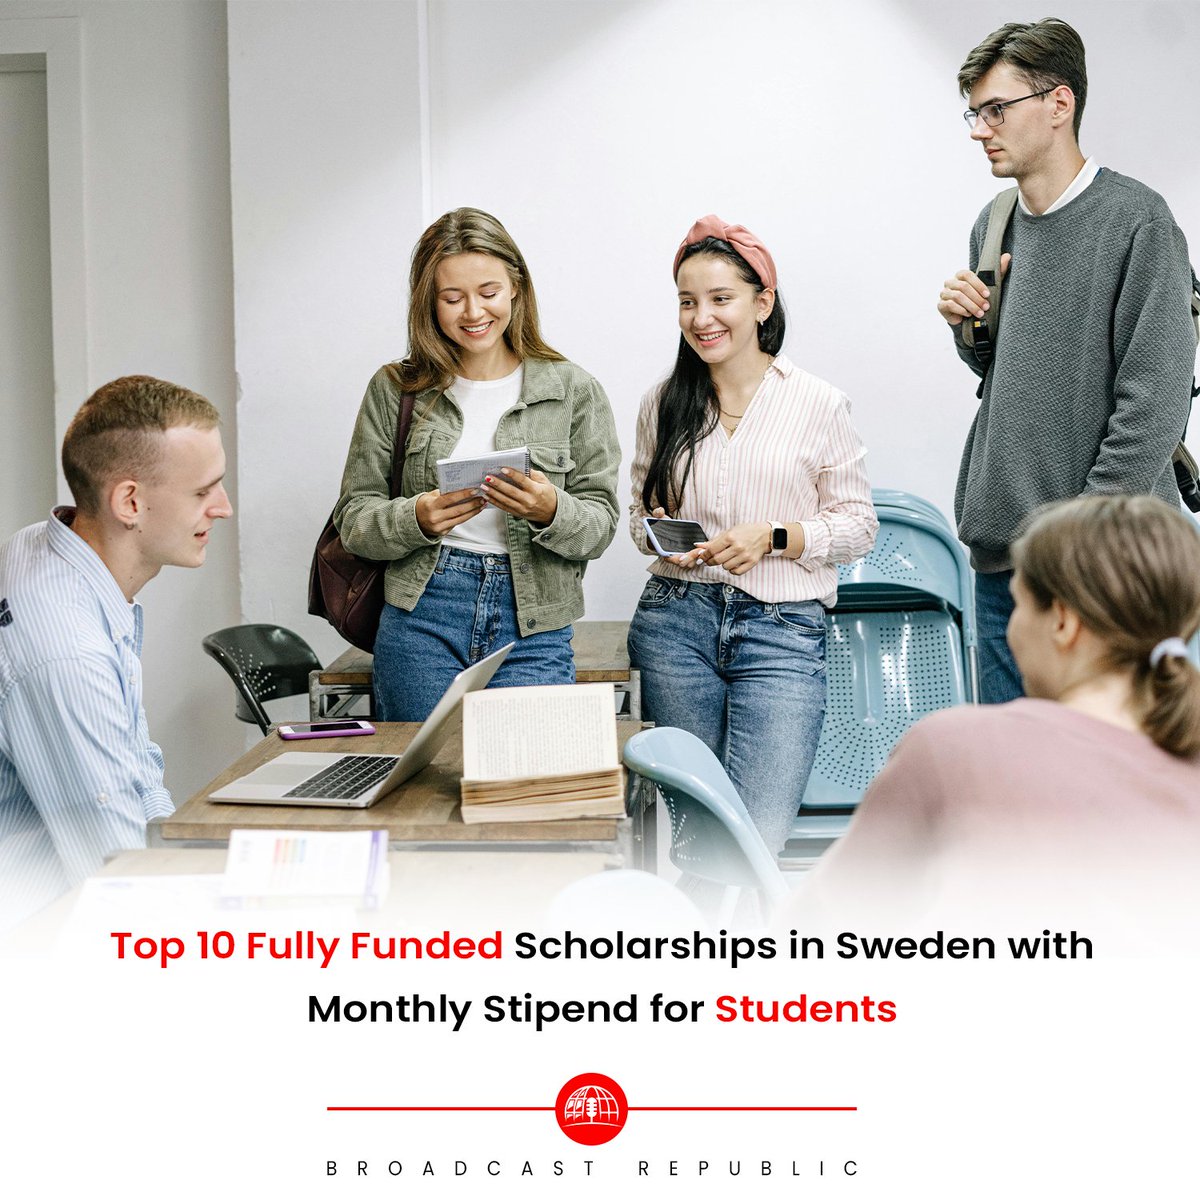 Top 10 Fully Funded Scholarships in Sweden with Monthly Stipend for Students.